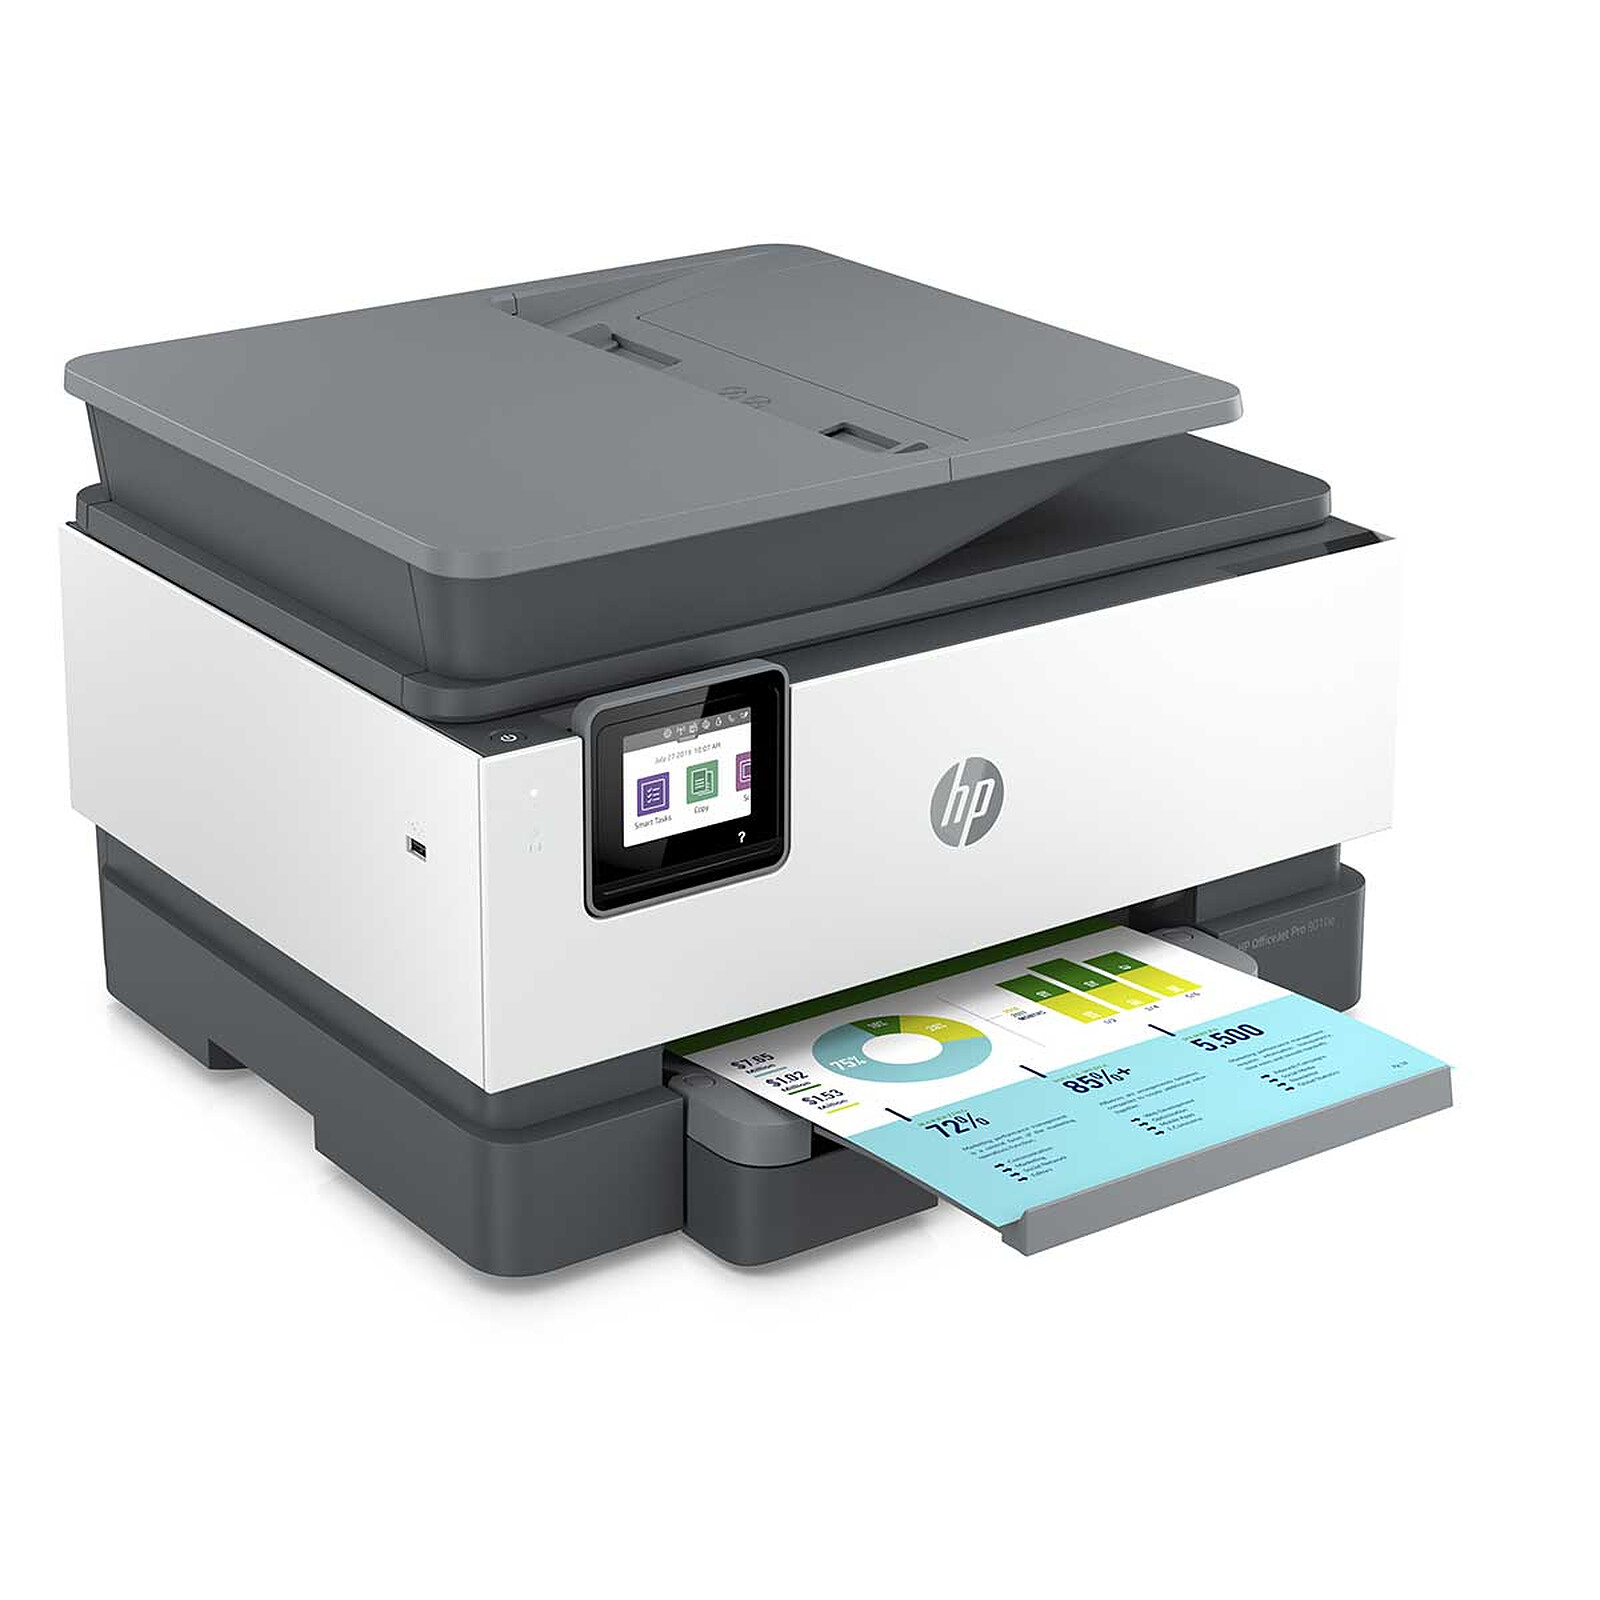 Hp Officejet Pro 9010 All In One Printer at best price in Kamrup